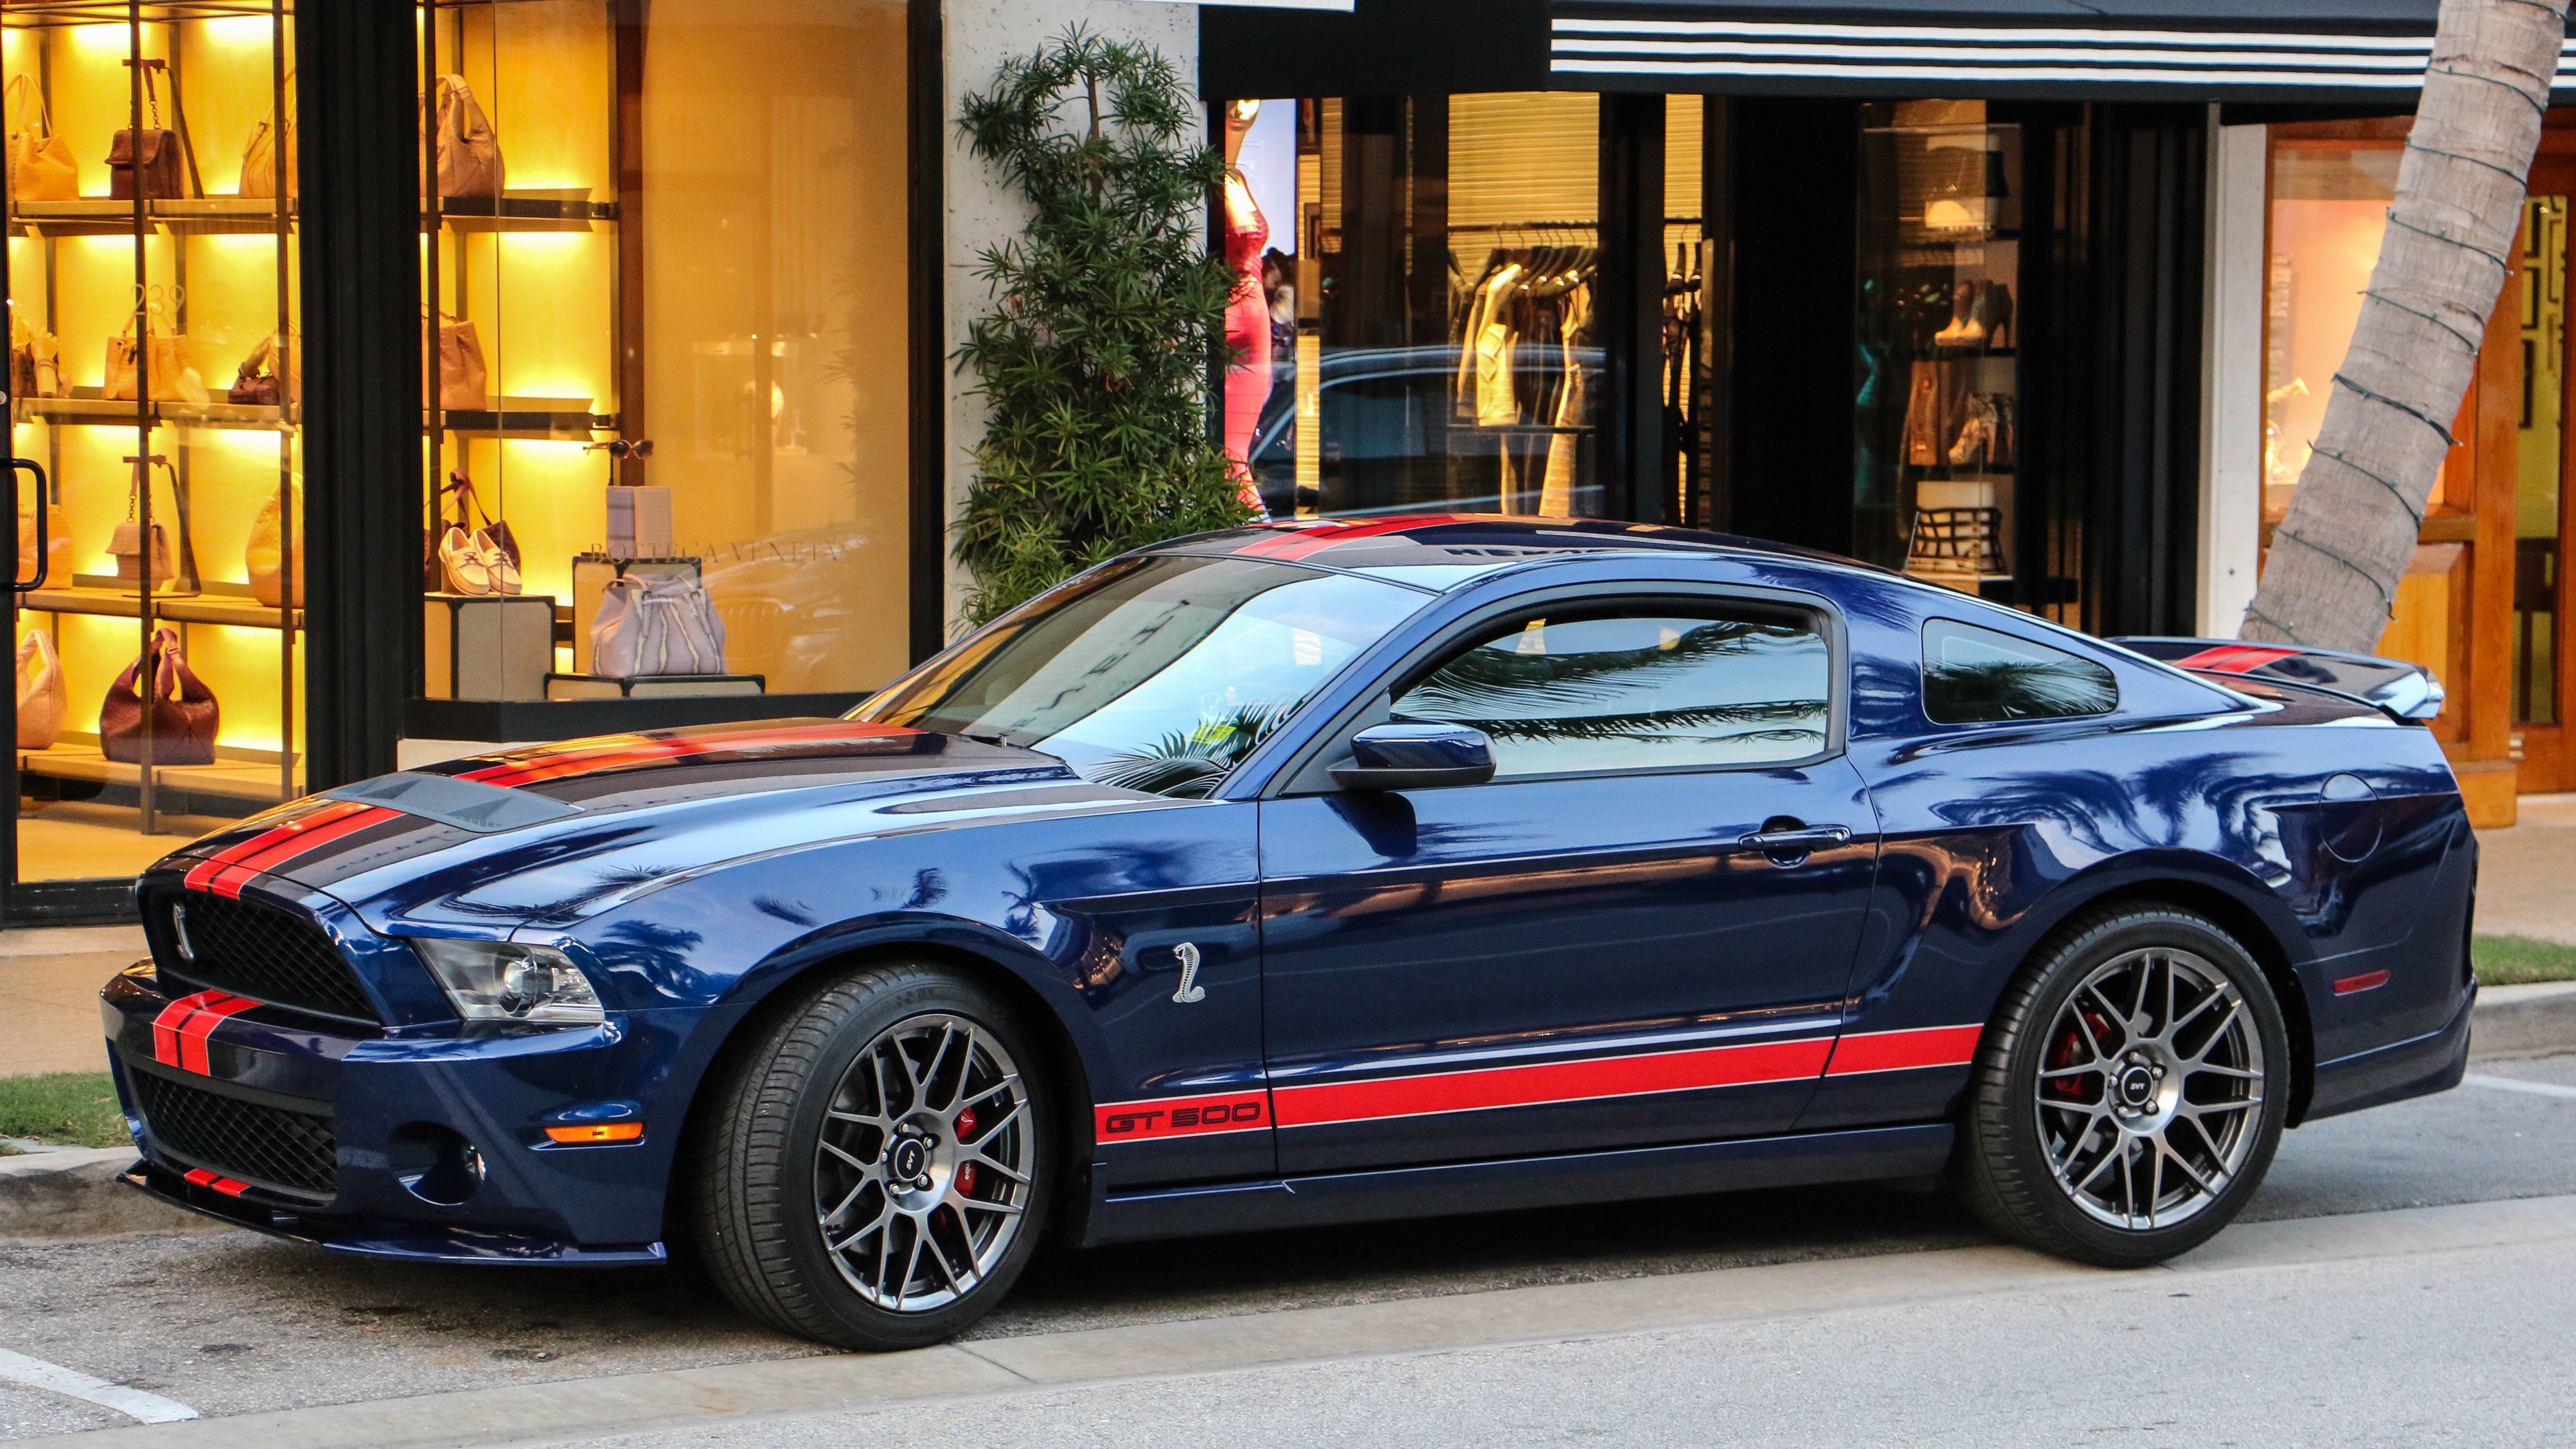 sports Car, Muscle Cars, Ford Mustang, Ford Mustang Shelby, Ford Shelby GT500, Gt500 Wallpaper